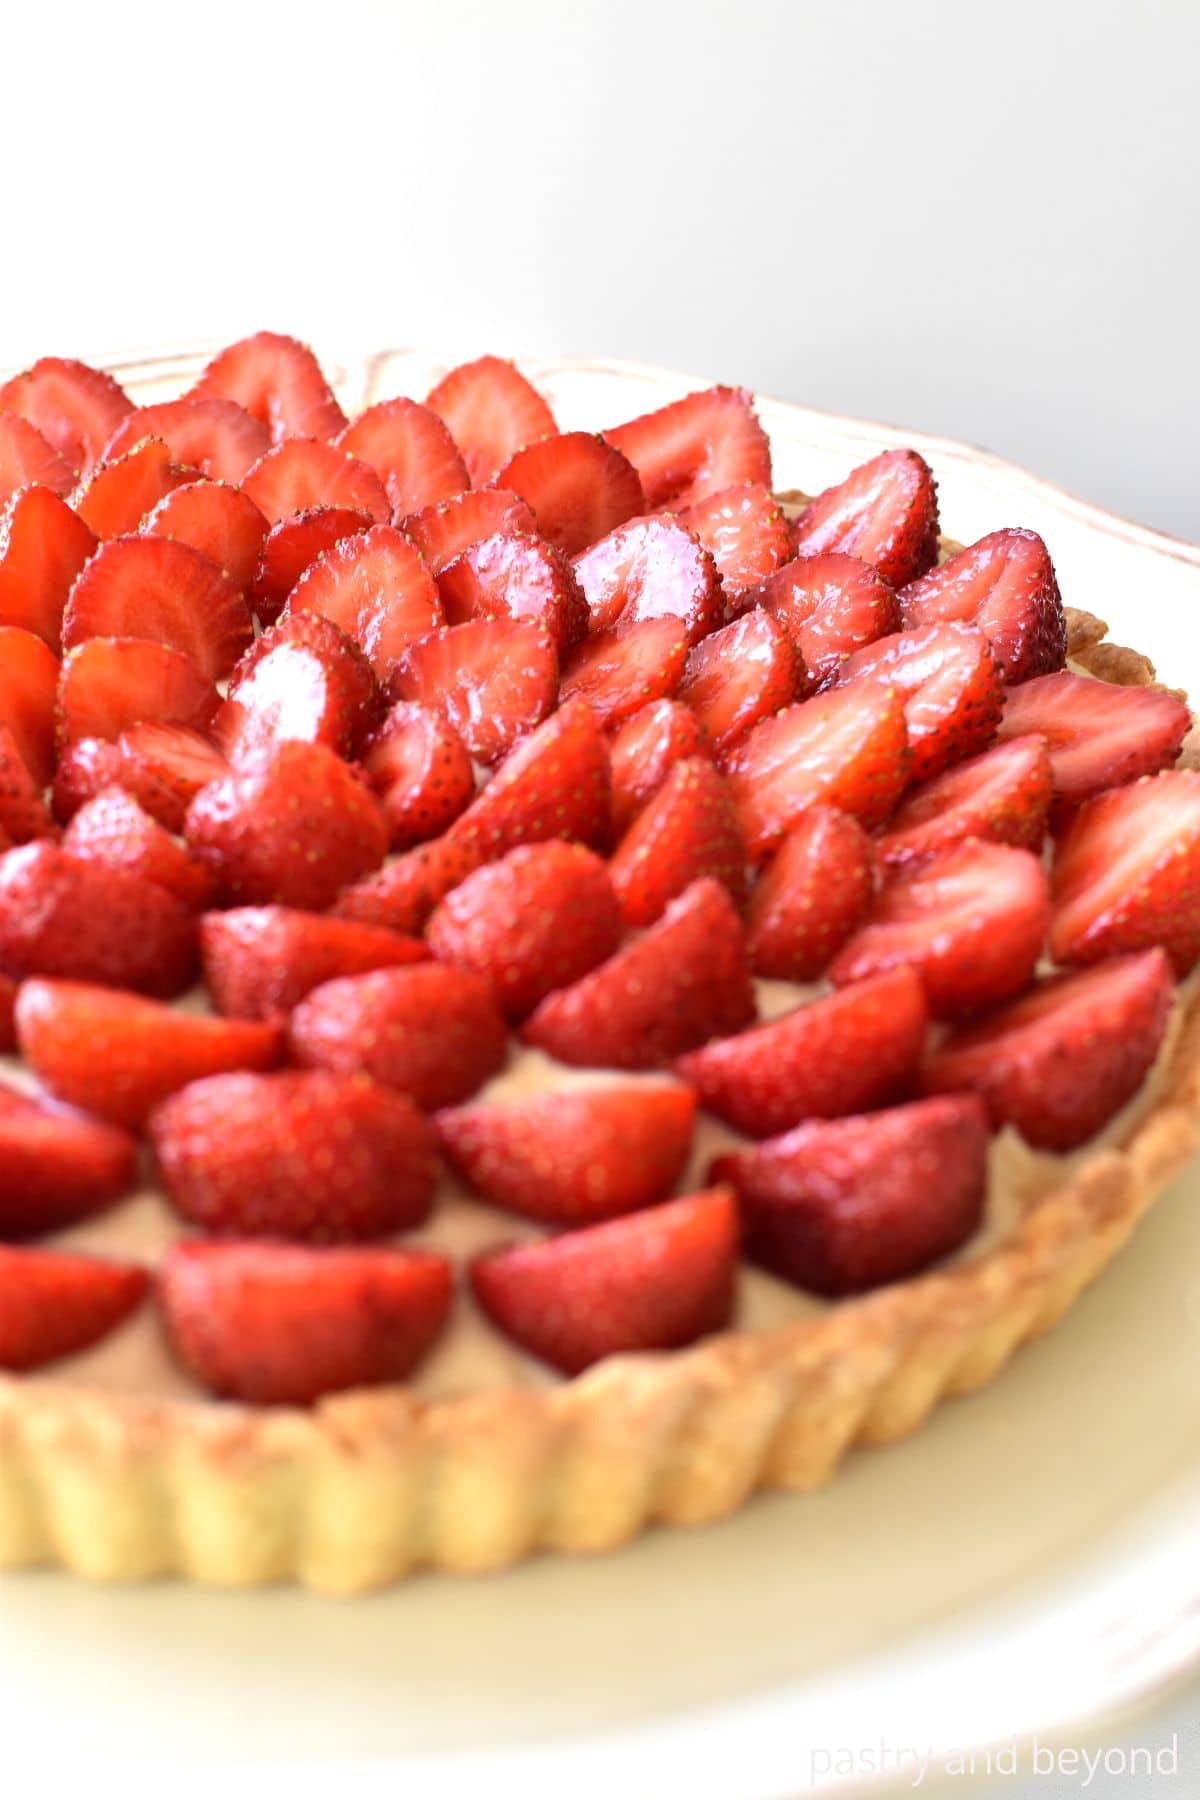 Strawberry tart on a plate.